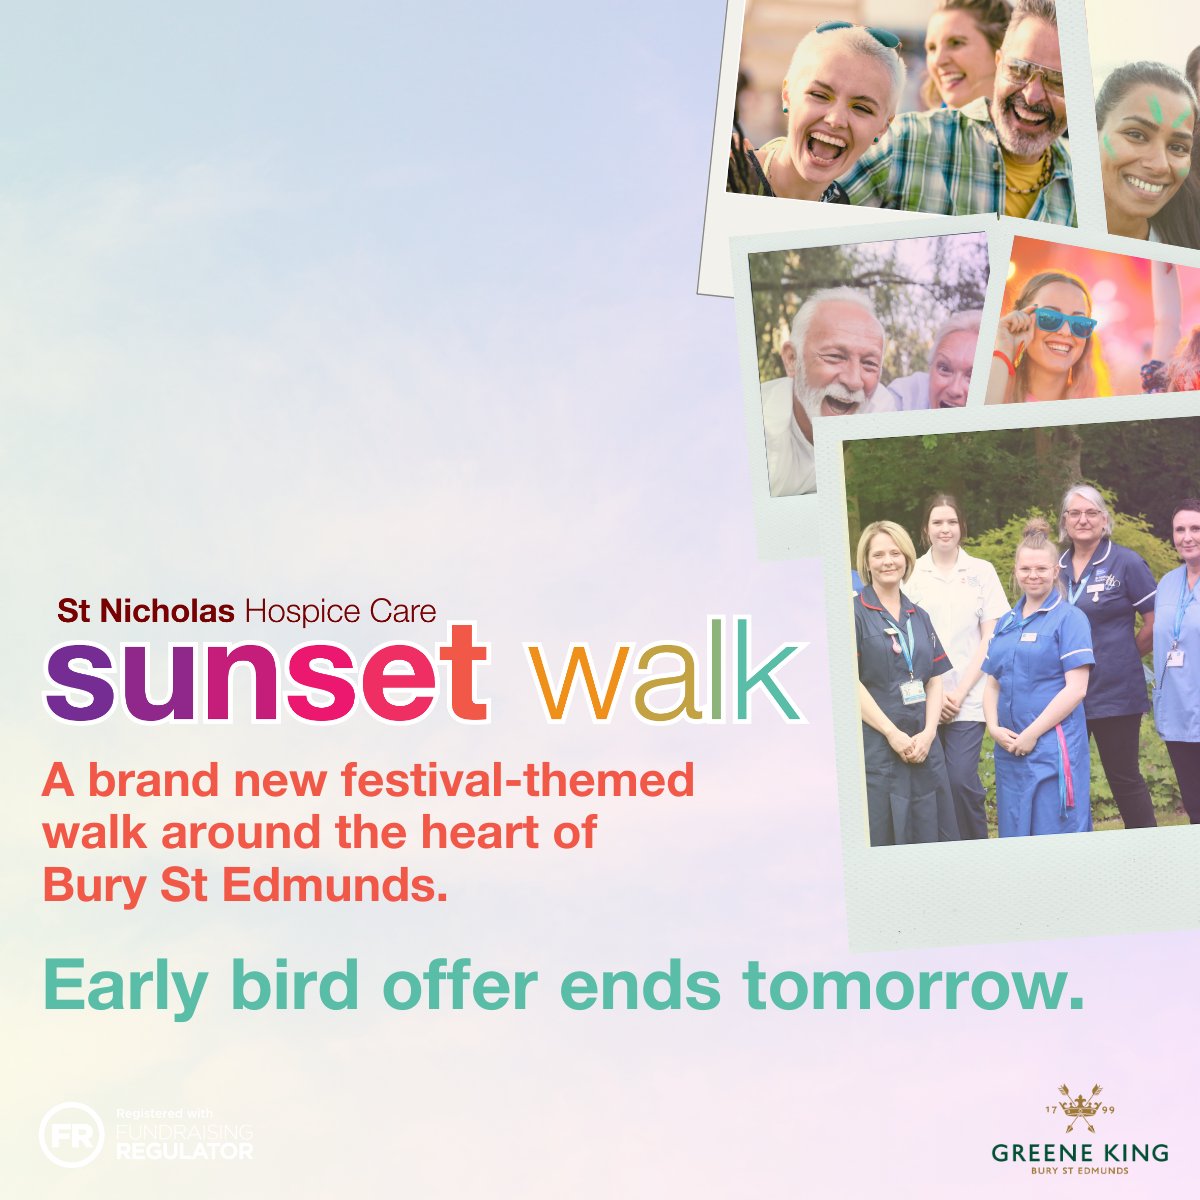 Last chance to catch the early bird, which ends tomorrow. Walk 10 or 15km at our Sunset Walk, sponsored by Greene King, on June 22. Register now for our festival-themed evening of music and memories: stnicholashospice.org.uk/fundraising-ev… #SunsetWalk